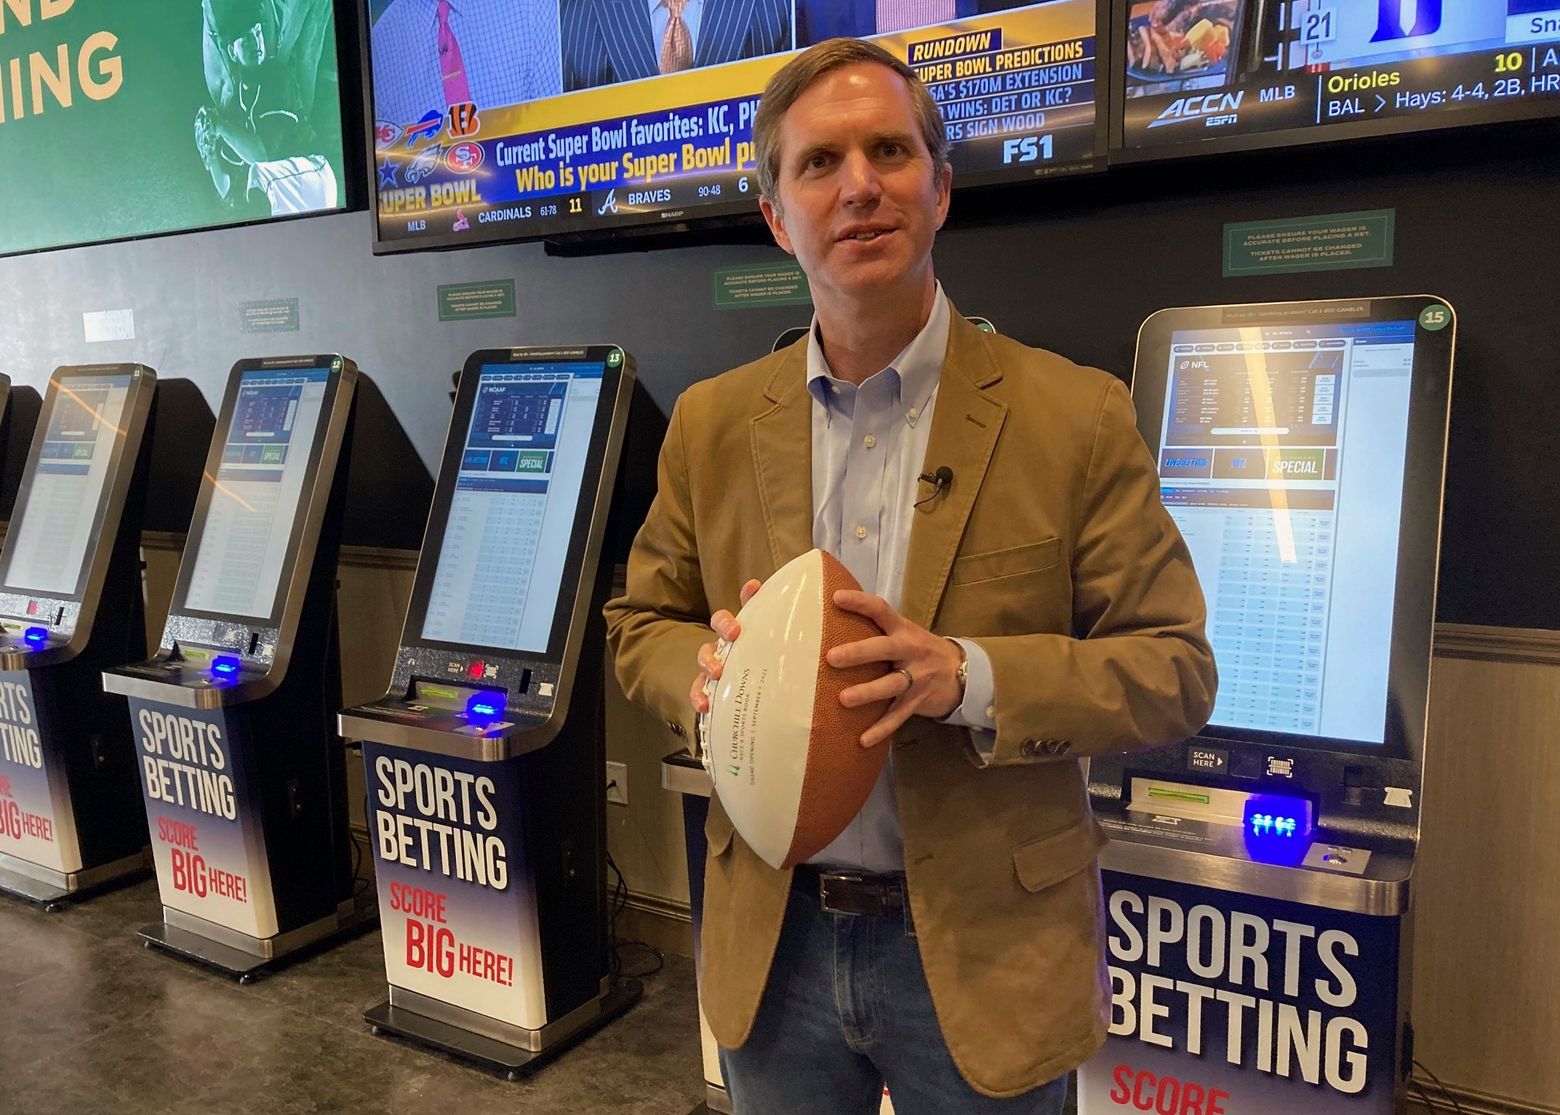 Legal sports betting opens to fanfare in Kentucky; governor makes